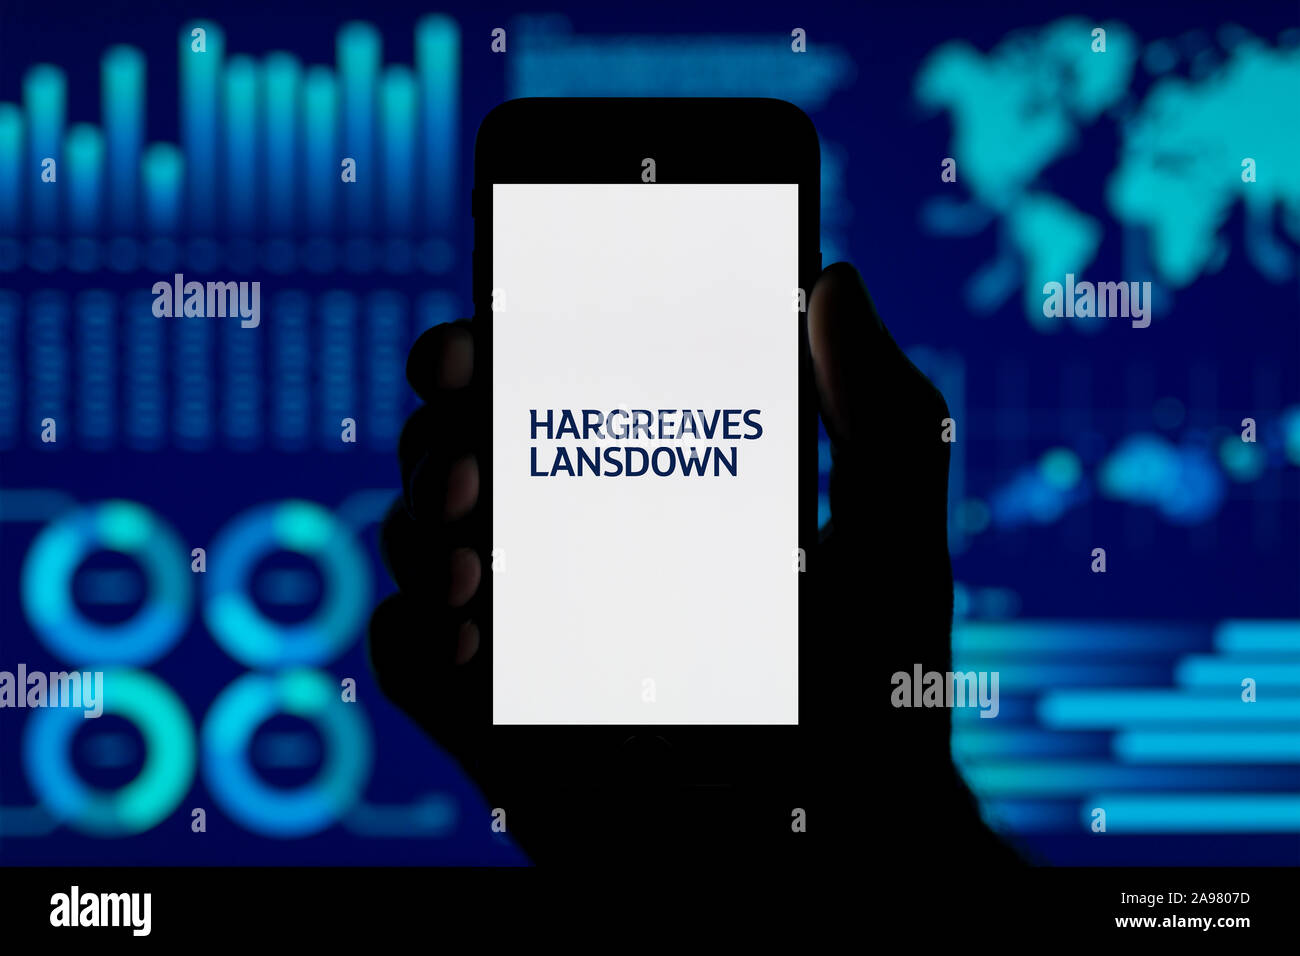 A man holds up an iPhone which displays the Hargreaves Lansdown logo, shot against a data visualisation style background (Editorial use only). Stock Photo